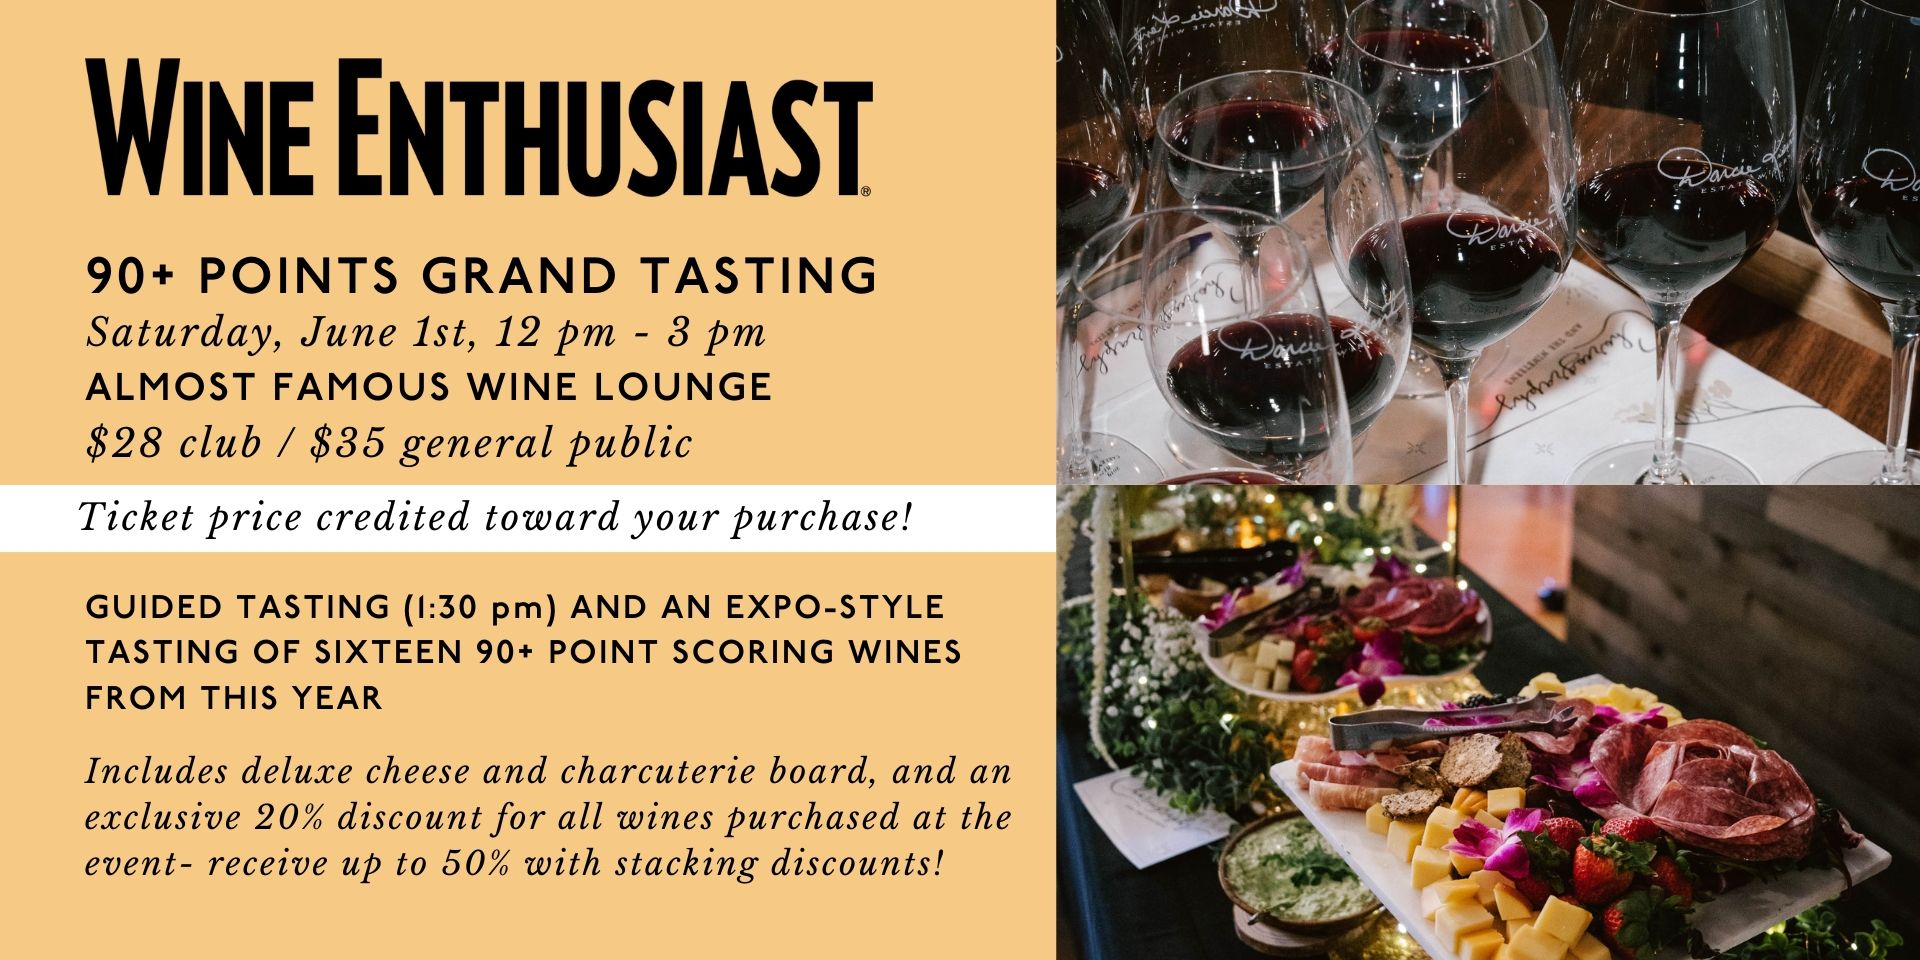 Wine Enthusiast 90+ Points Grand Tasting at Almost Famous Wine Lounge promotional image